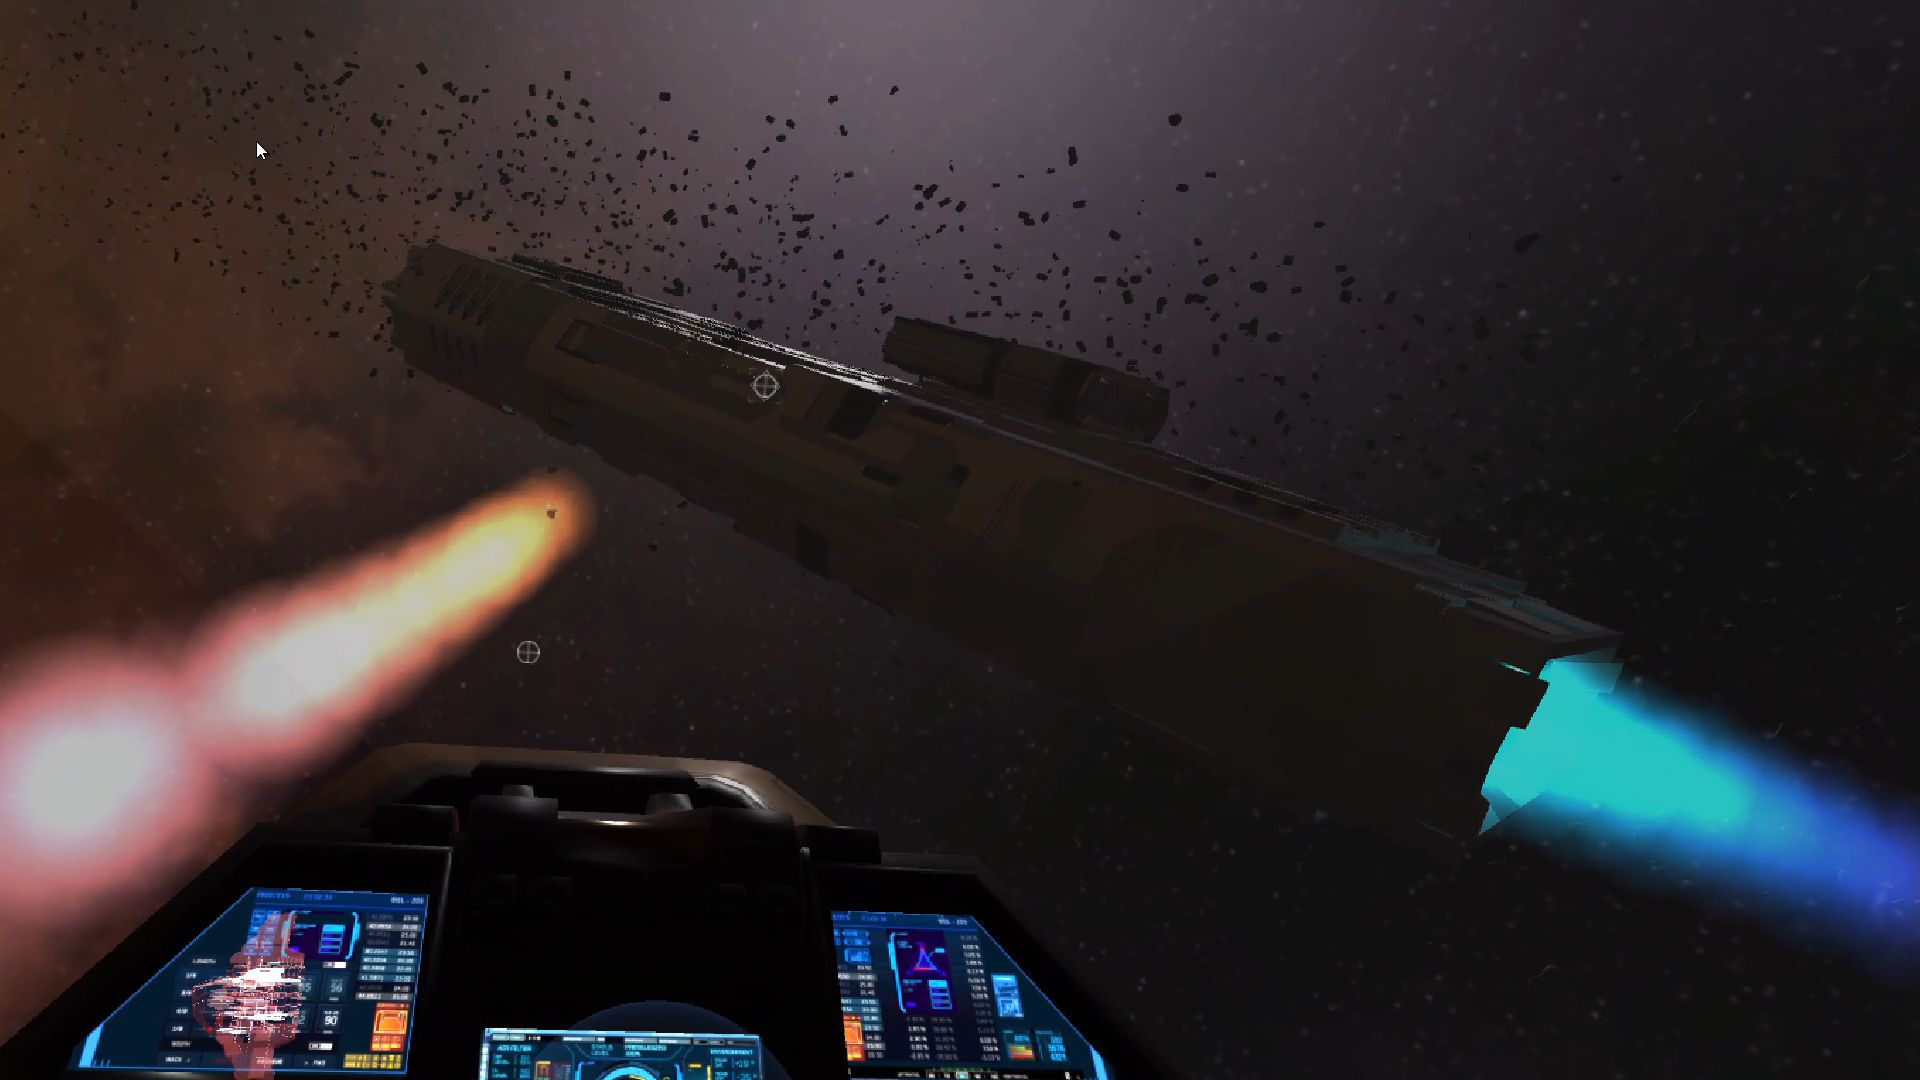 Godot VR Space sim Image is from a VR space simulator game Bastiaan Olij develops on stream.